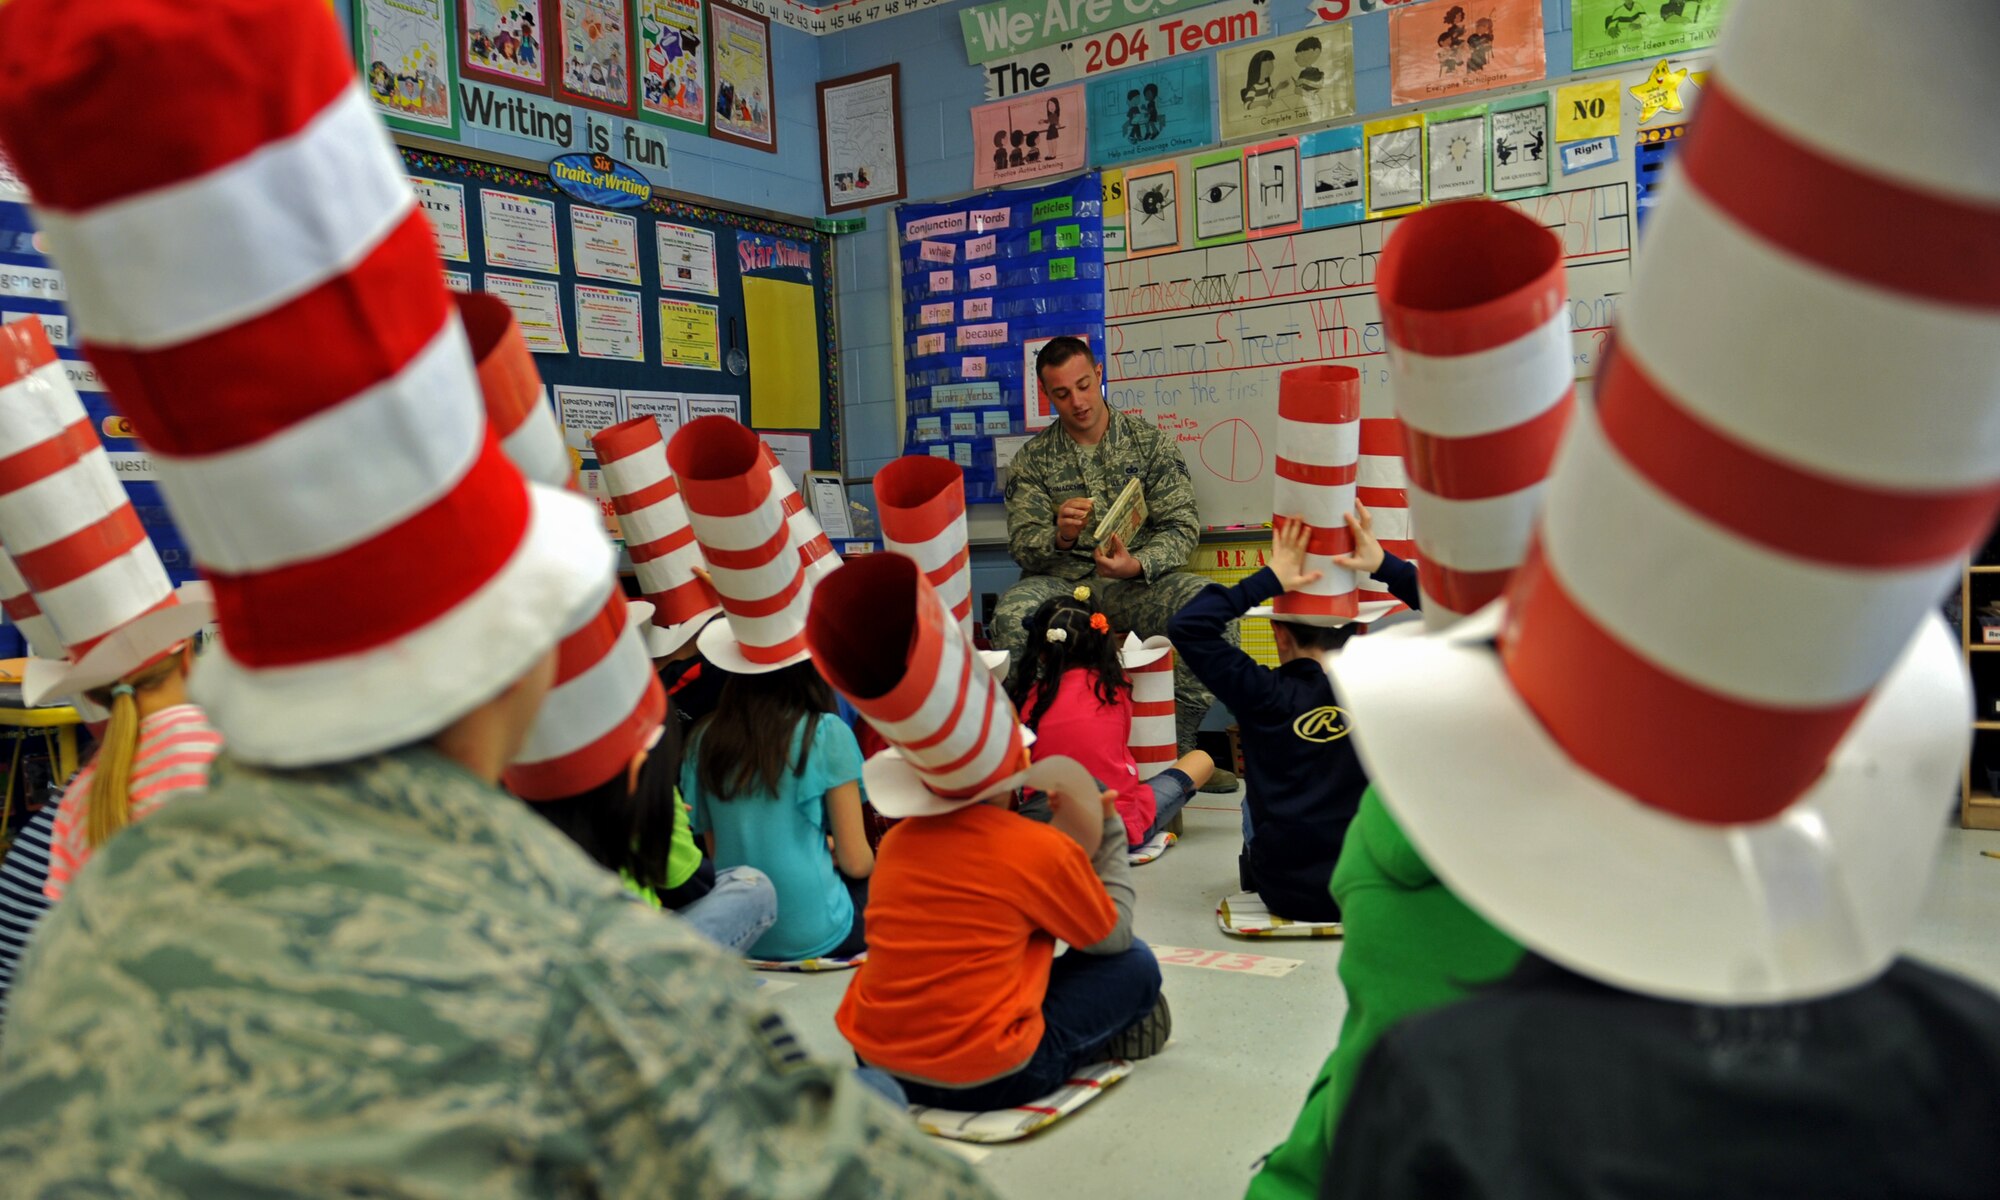 Staff Sgt. Charles Cornacchio, a member of the 51st Security Forces Squadron, reads a book to third-grade students during Read Across America Day in celebration of Dr. Seuss’ Birthday at Osan Air Base, Republic of Korea, March 5, 2014. More than 50 Team Osan military members volunteered to read to 21 Osan American Elementary School classes. (U.S. Air Force photo/Senior Airman Siuta B. Ika)